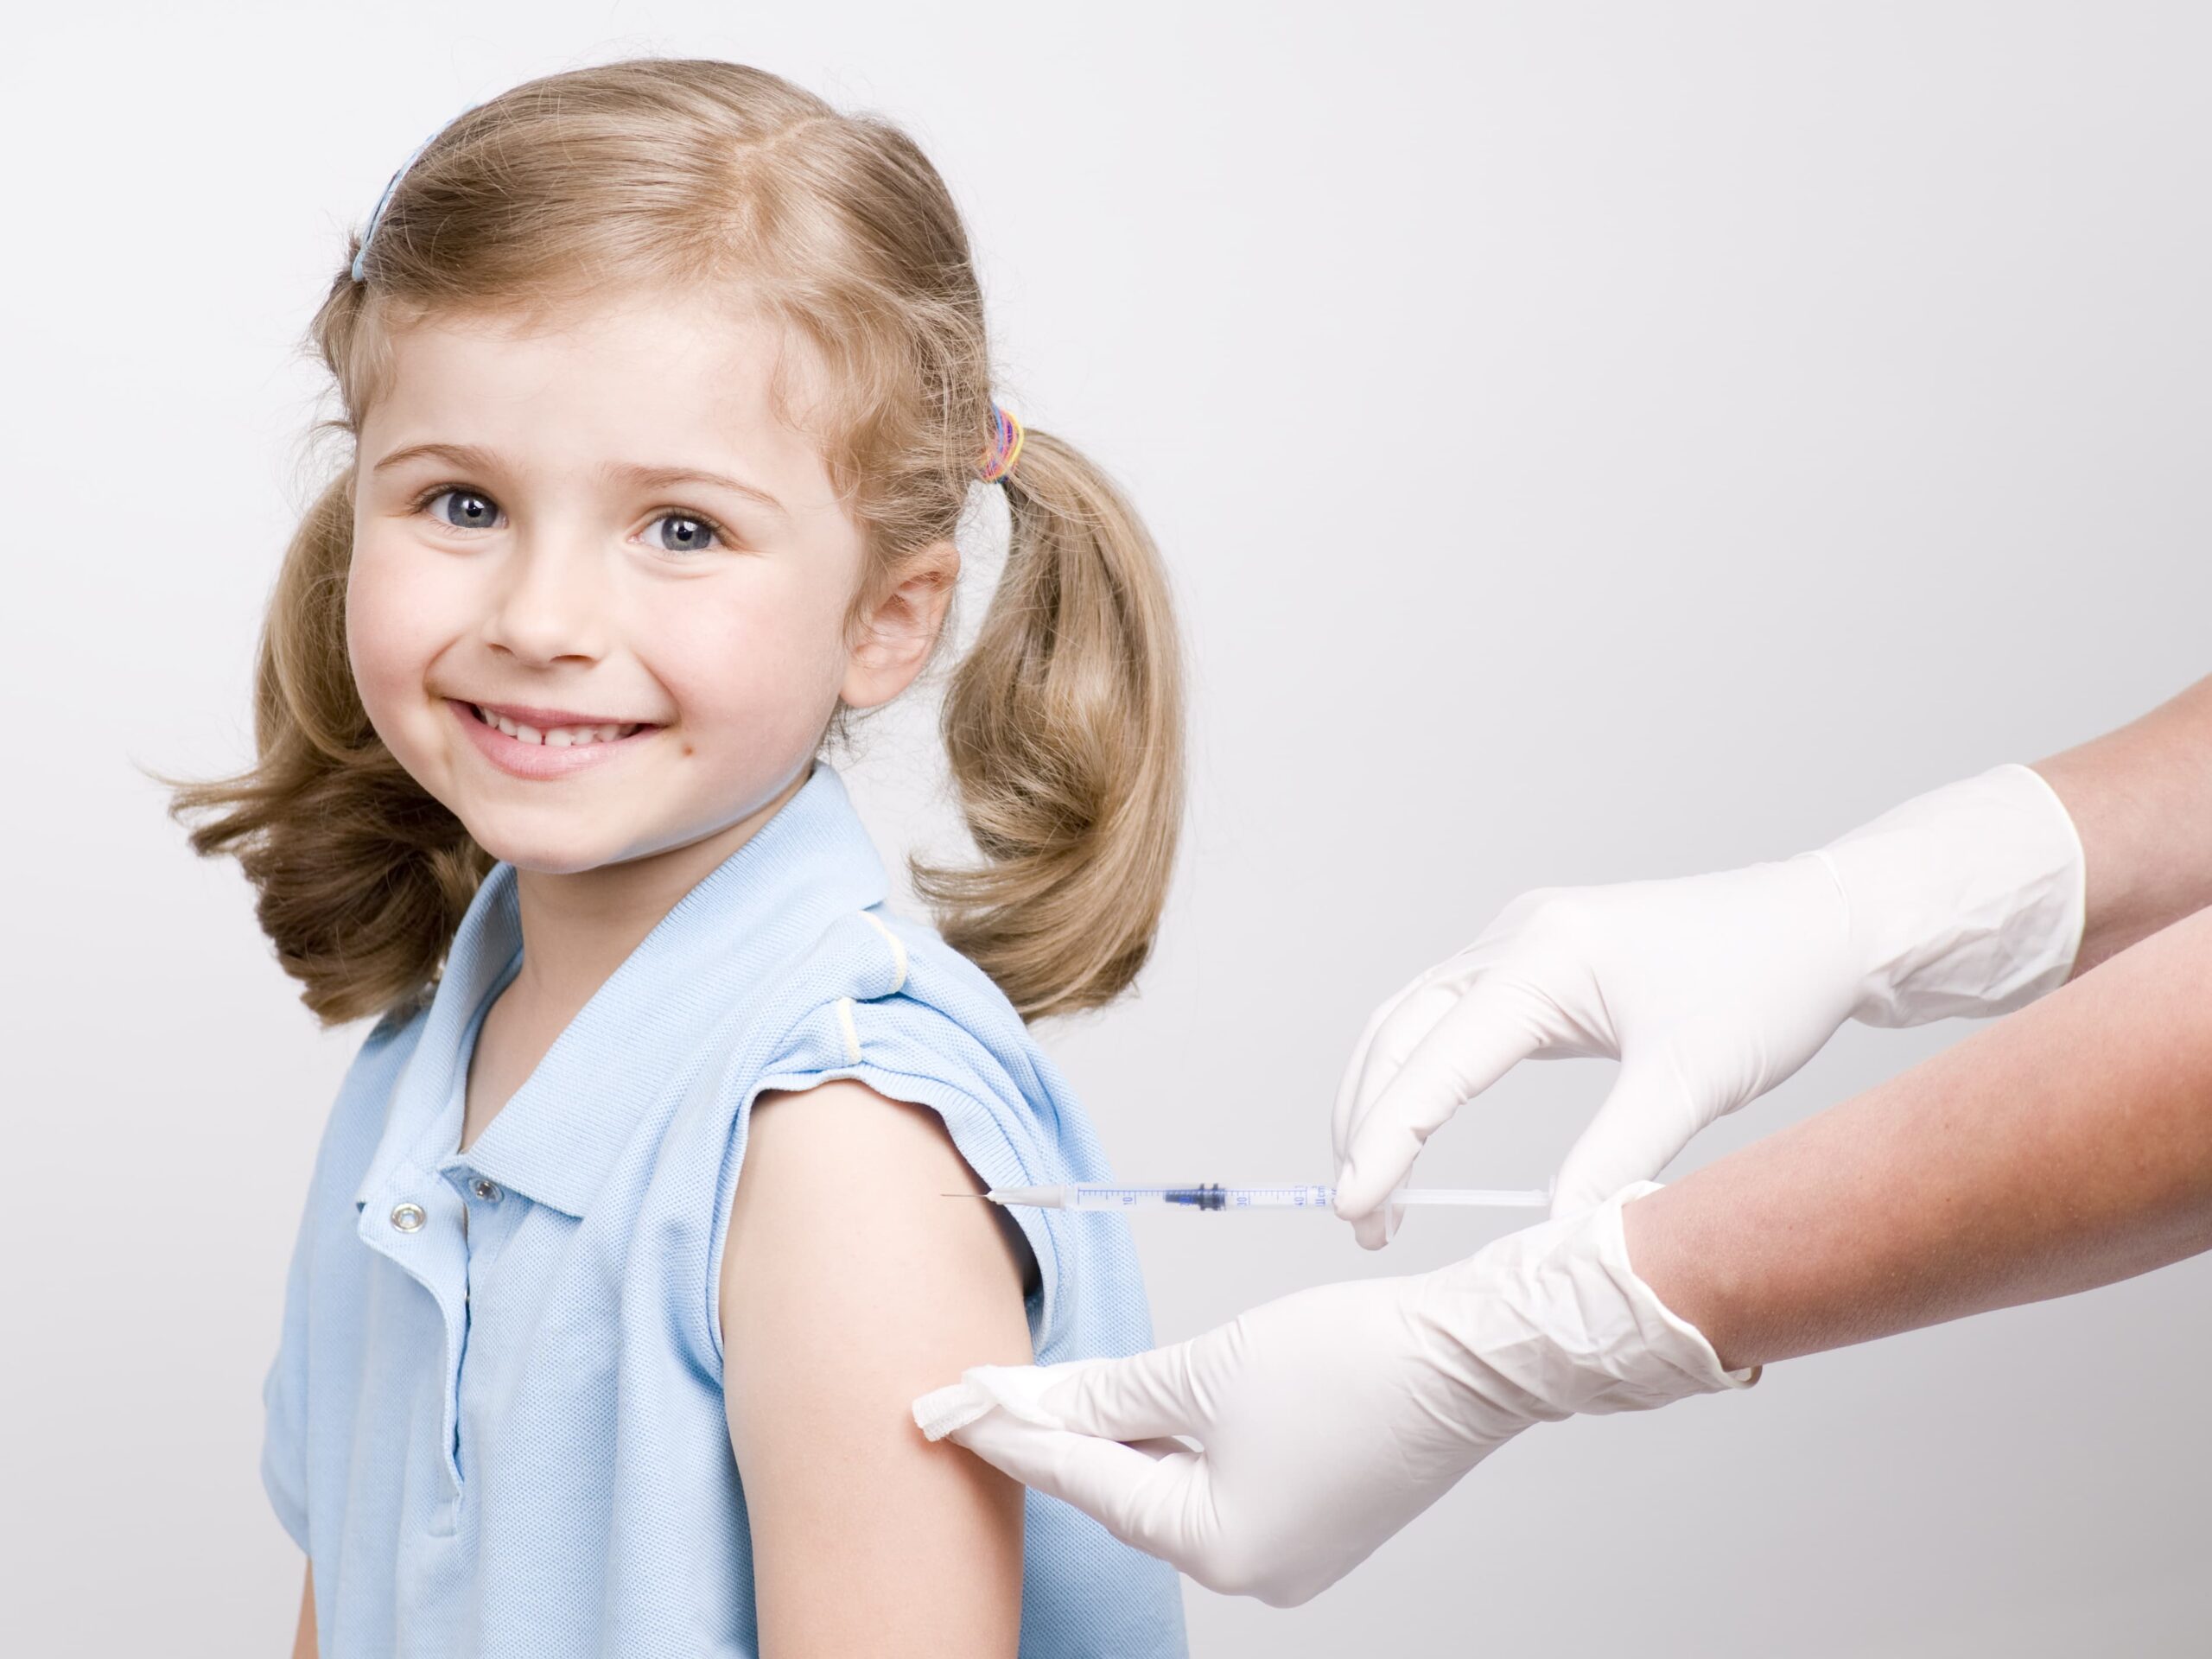 5 Key Points For Successful Vaccination